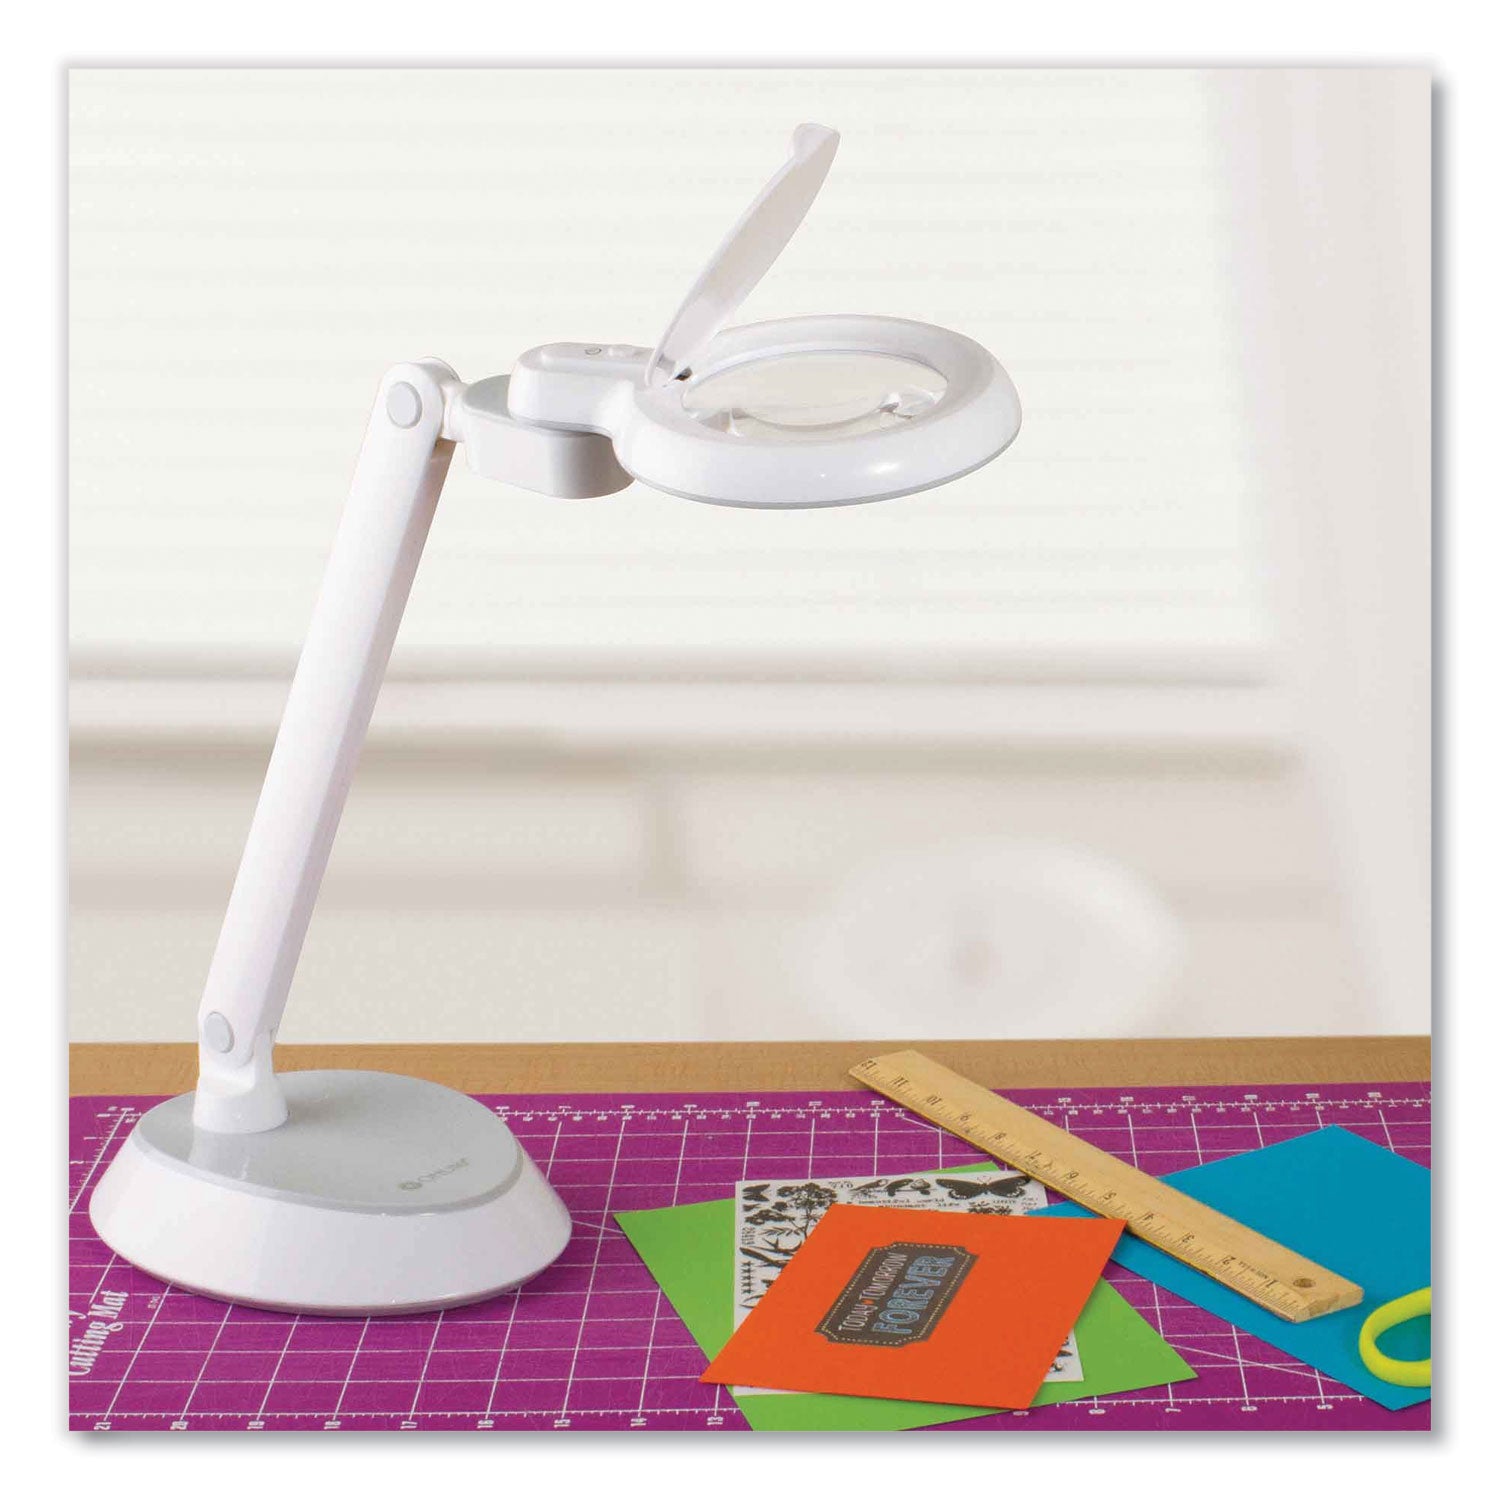 Space-Saving LED Magnifier Desk Lamp, 14" High, White, Ships in 4-6 Business Days - 2